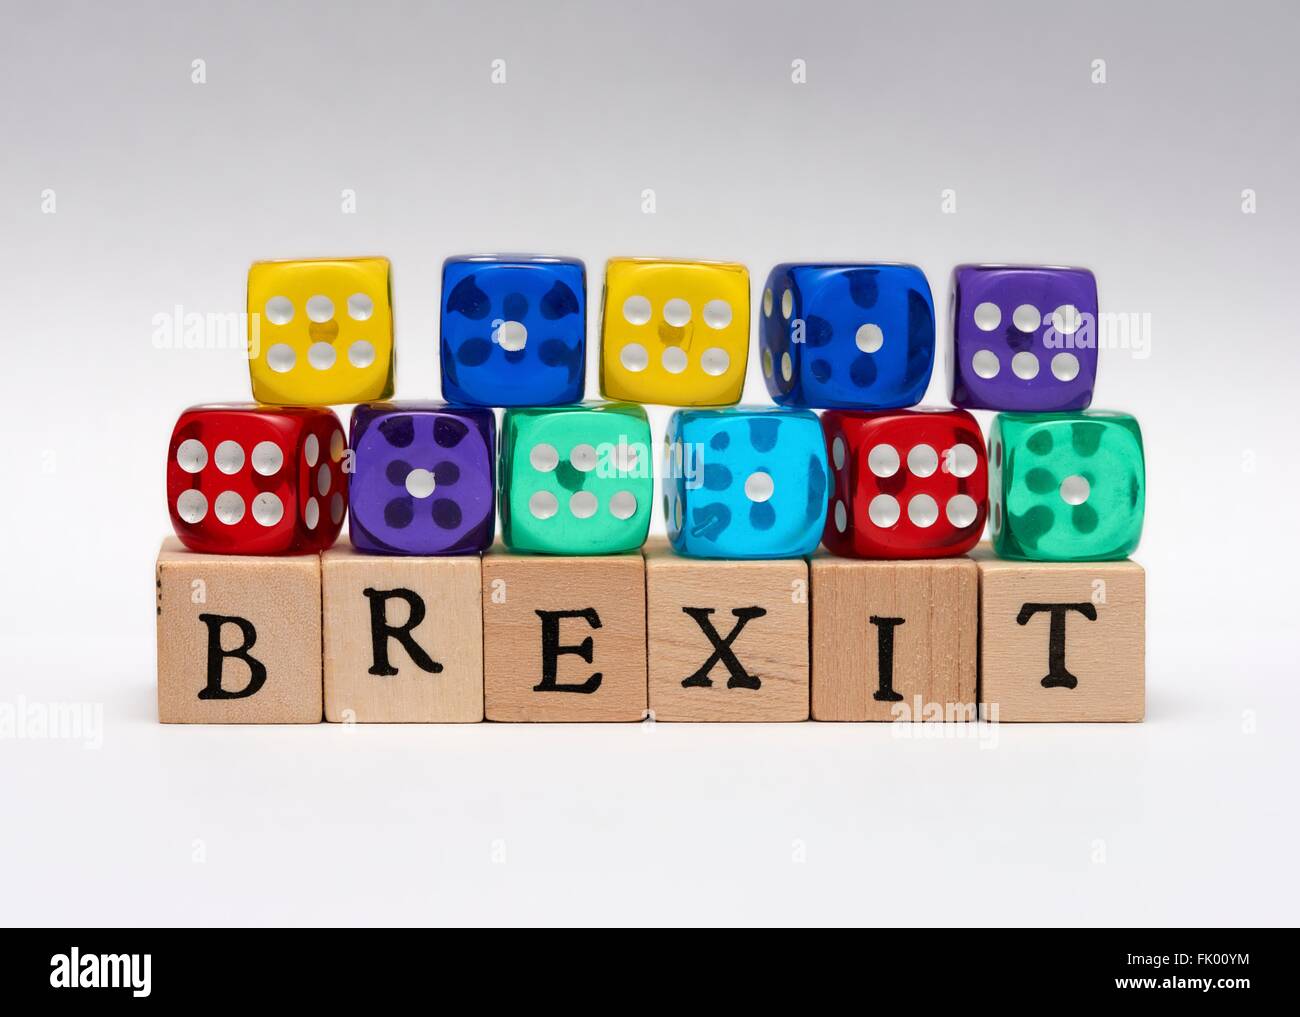 Brexit gamble concept a roll of the dice Stock Photo